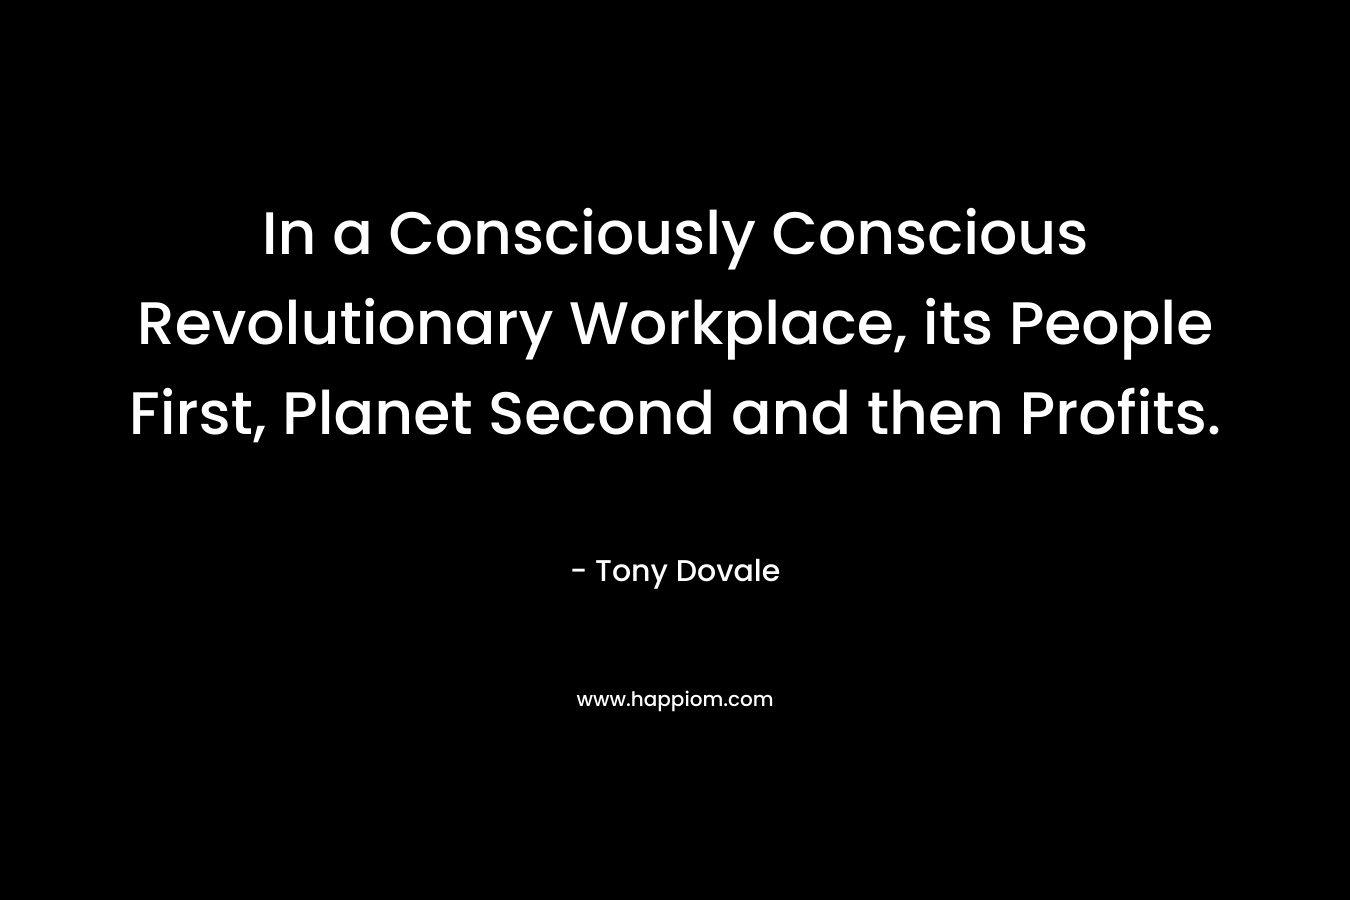 In a Consciously Conscious Revolutionary Workplace, its People First, Planet Second and then Profits. – Tony Dovale